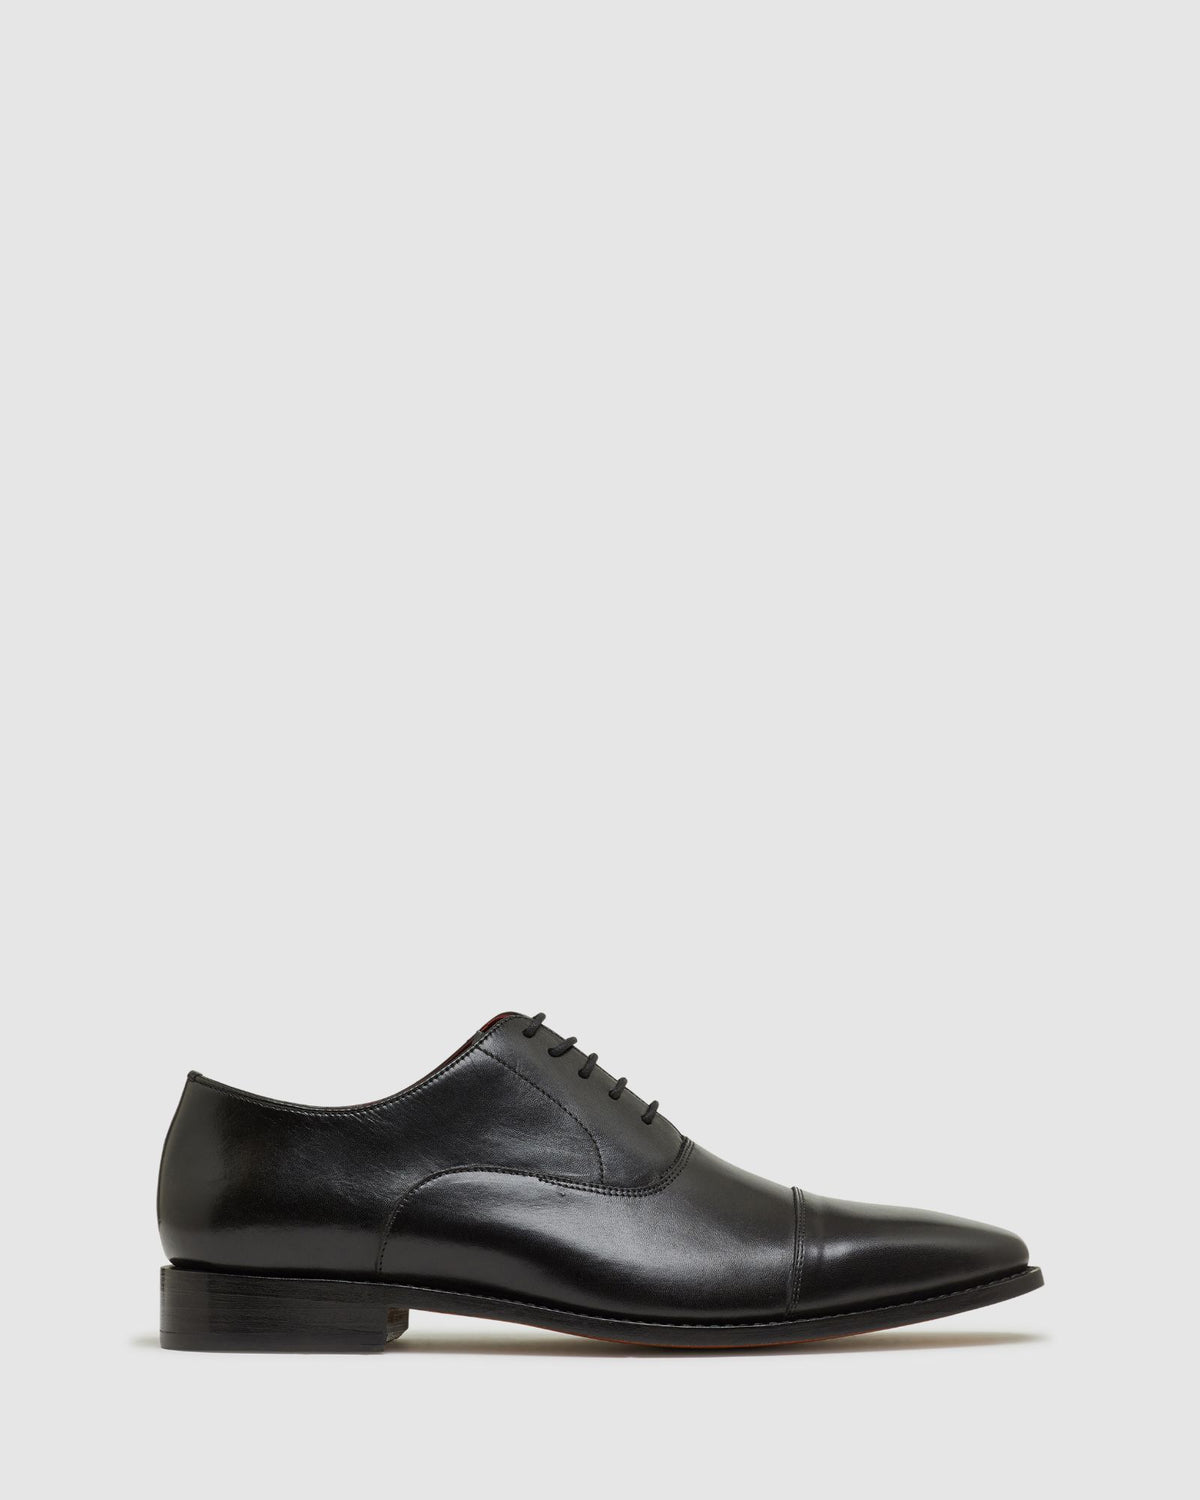 CHRISTOPHER GOODYEAR WELTED SHOES